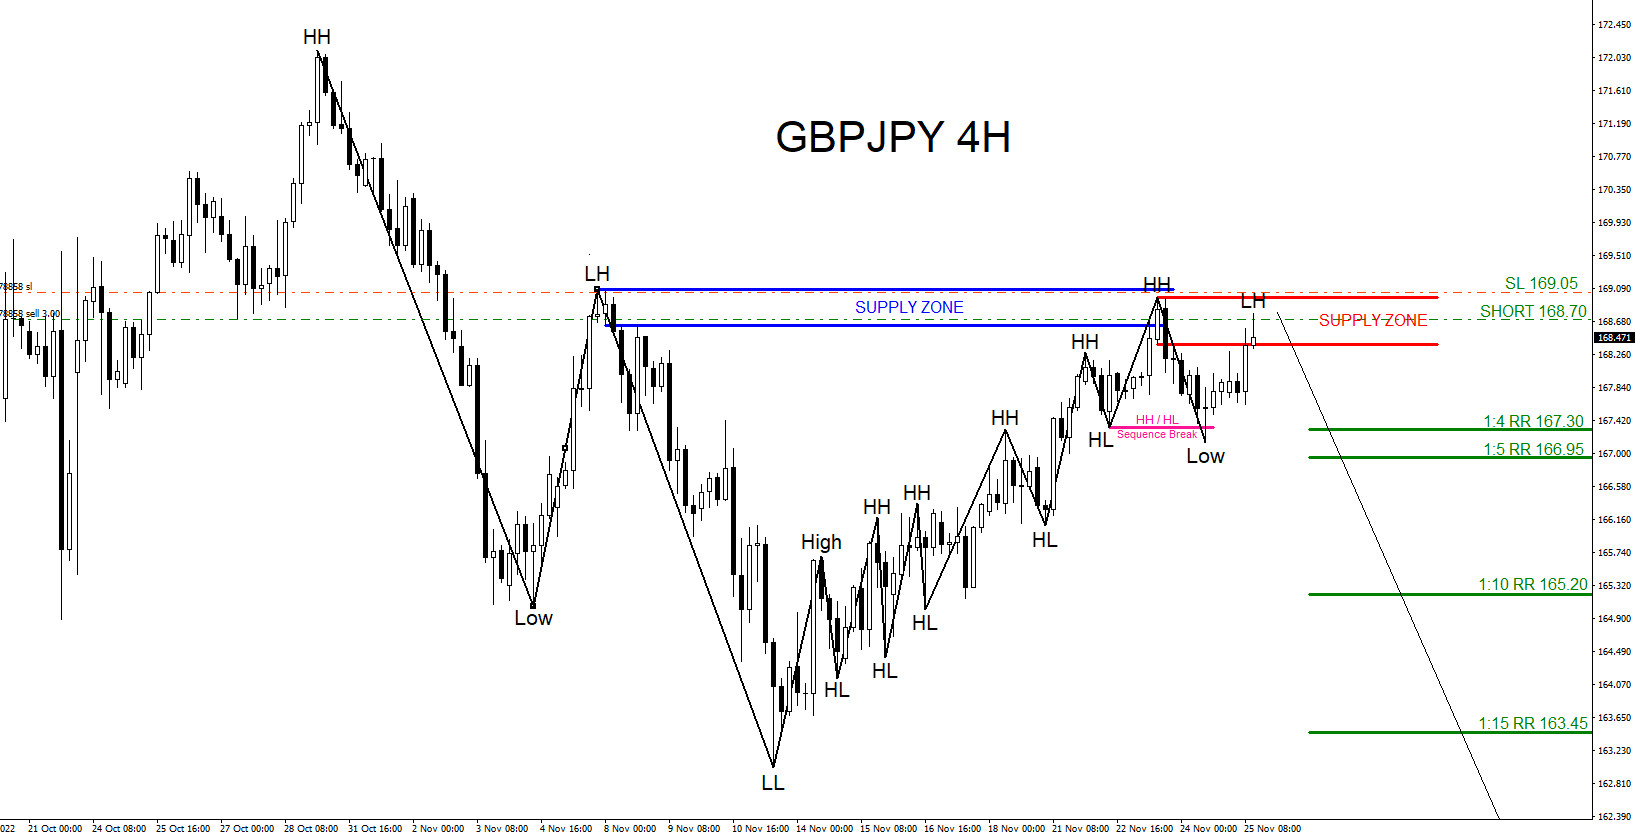 GBPJPY : Sell Trade Hits Targets